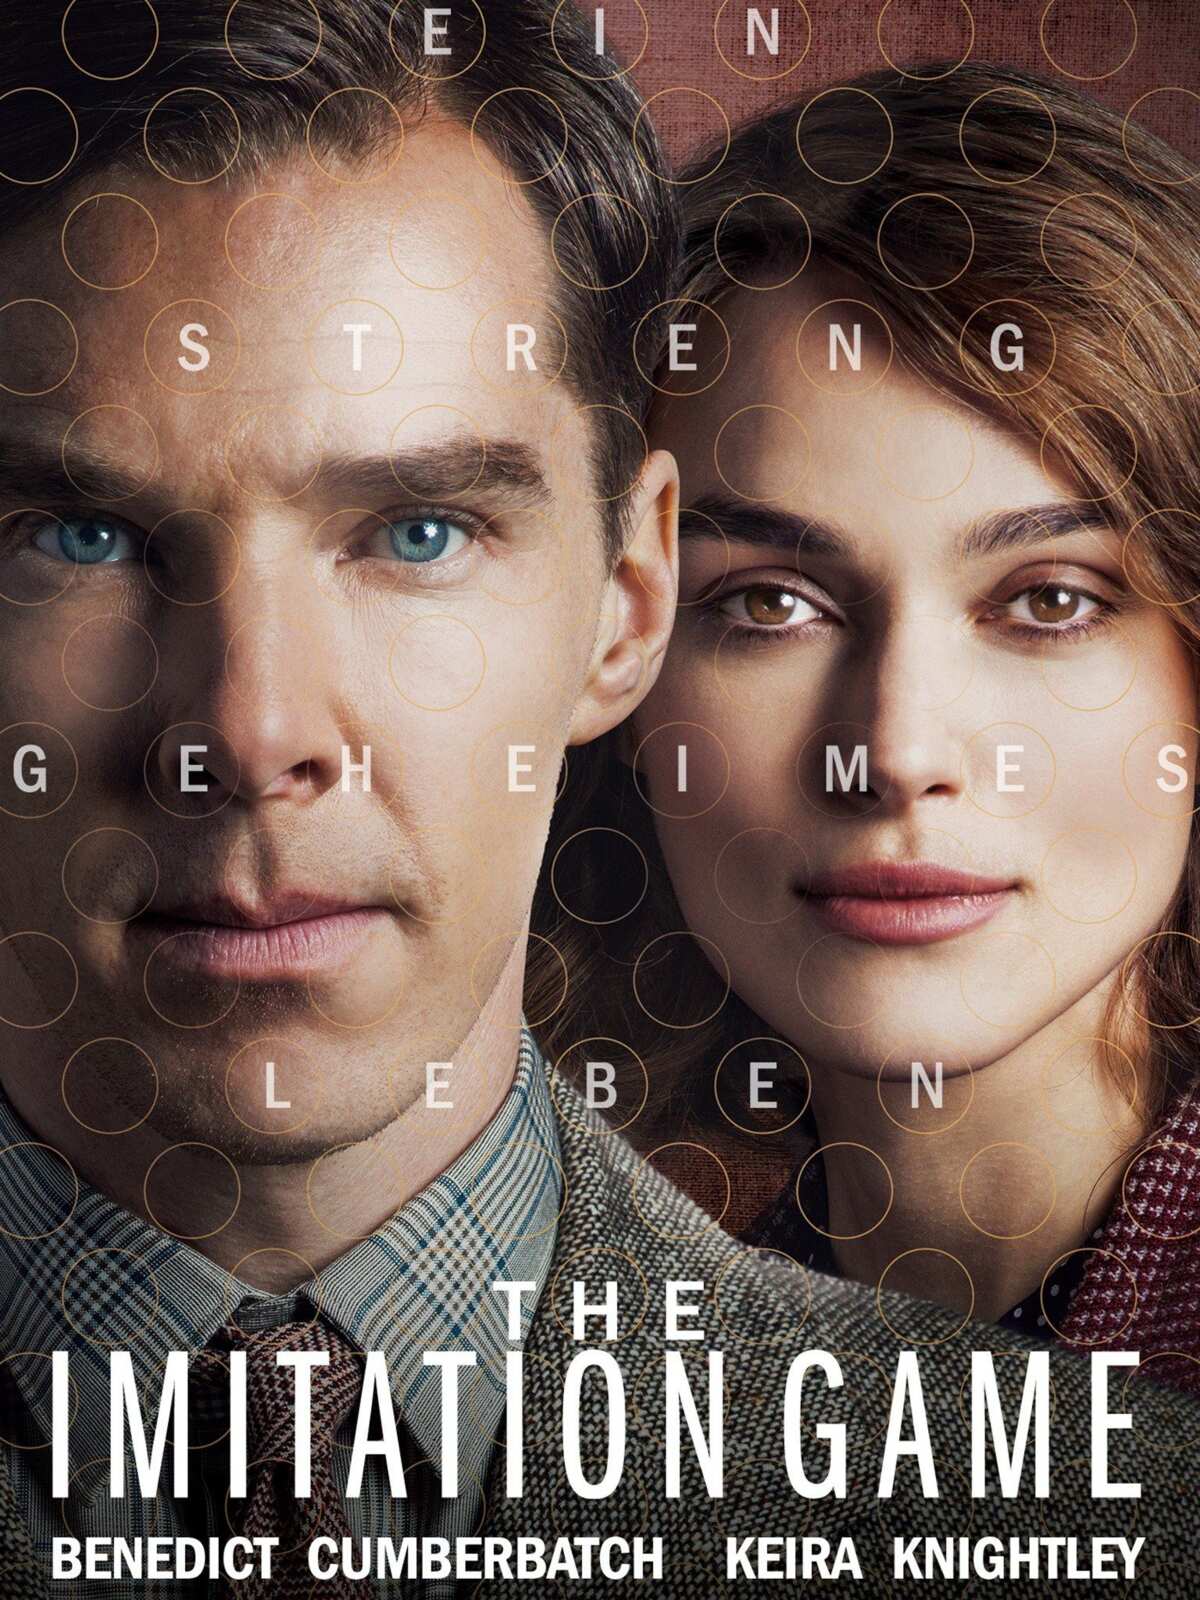 is the movie spy game based on a true story